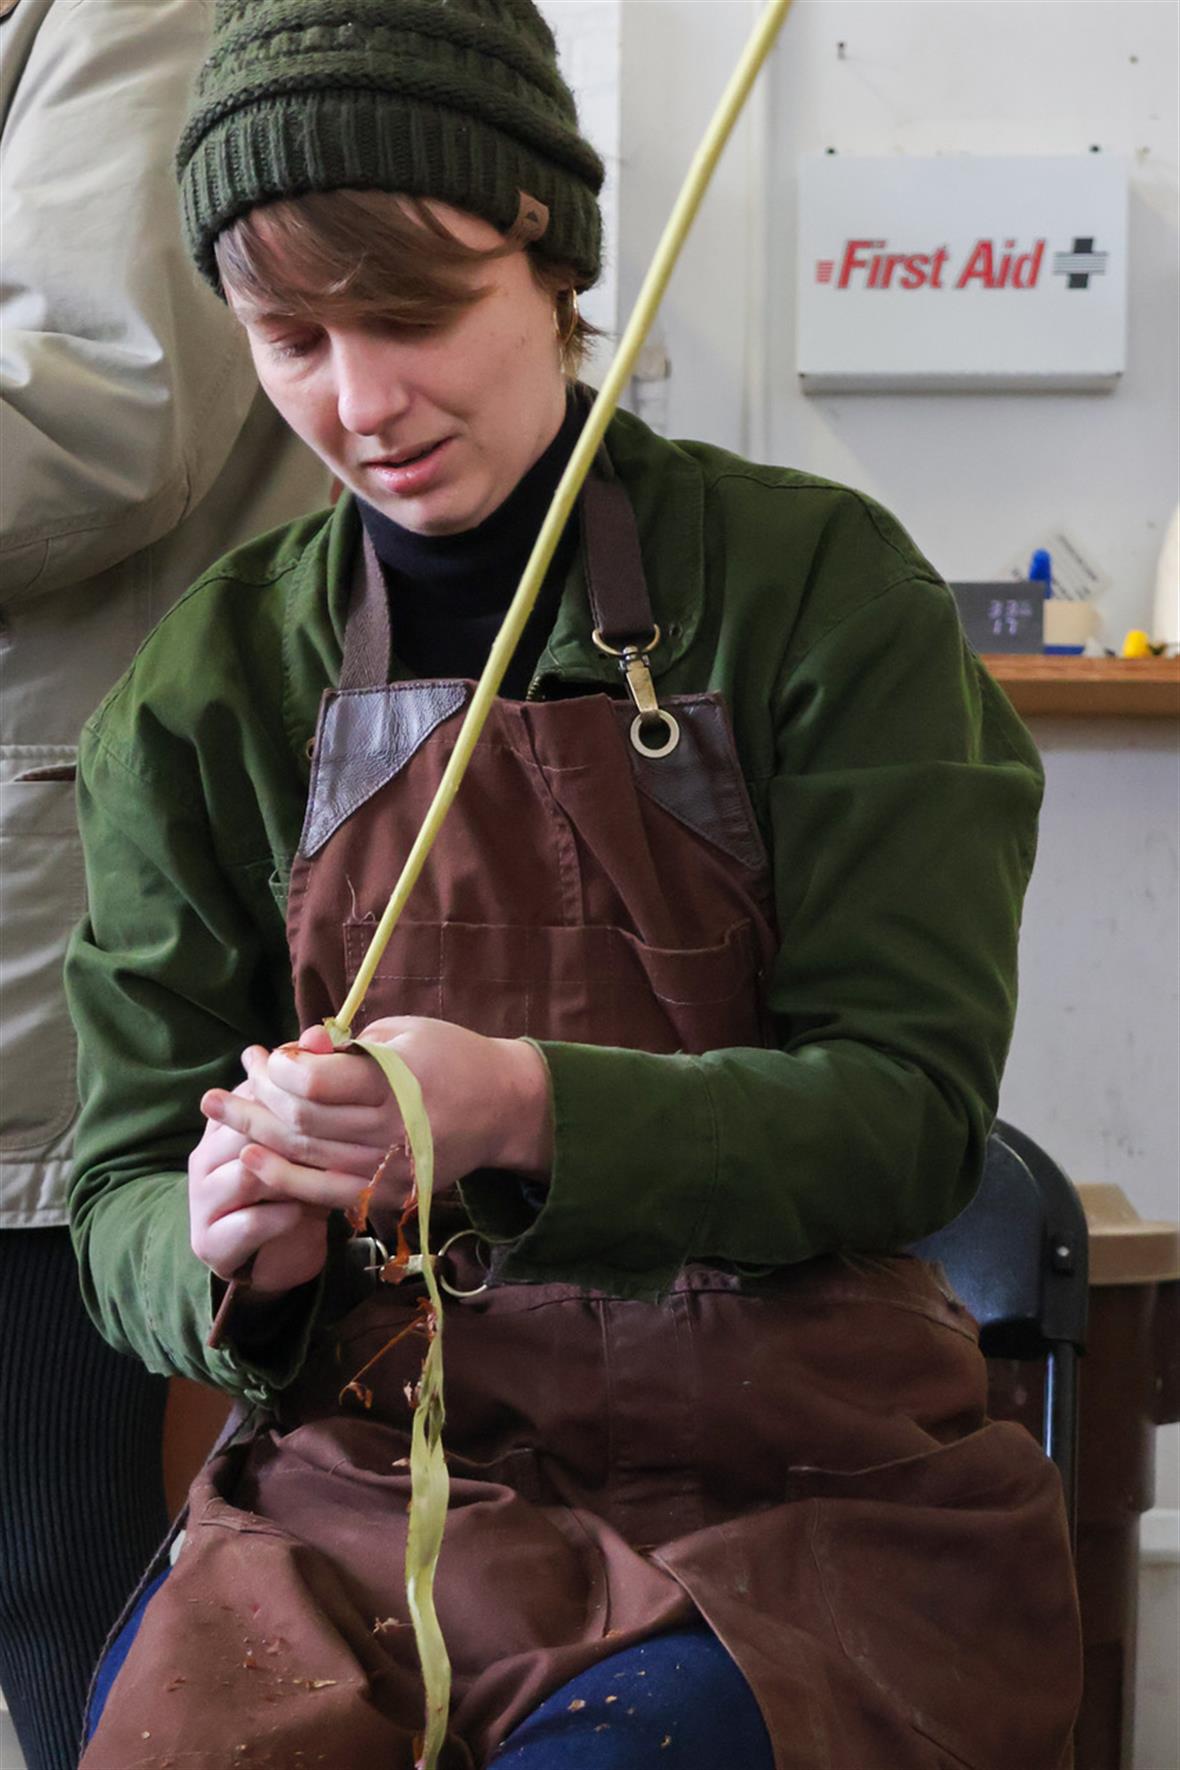 A student, wearing an apron, jacket, and hat, peels a piece of bark from a small branch.